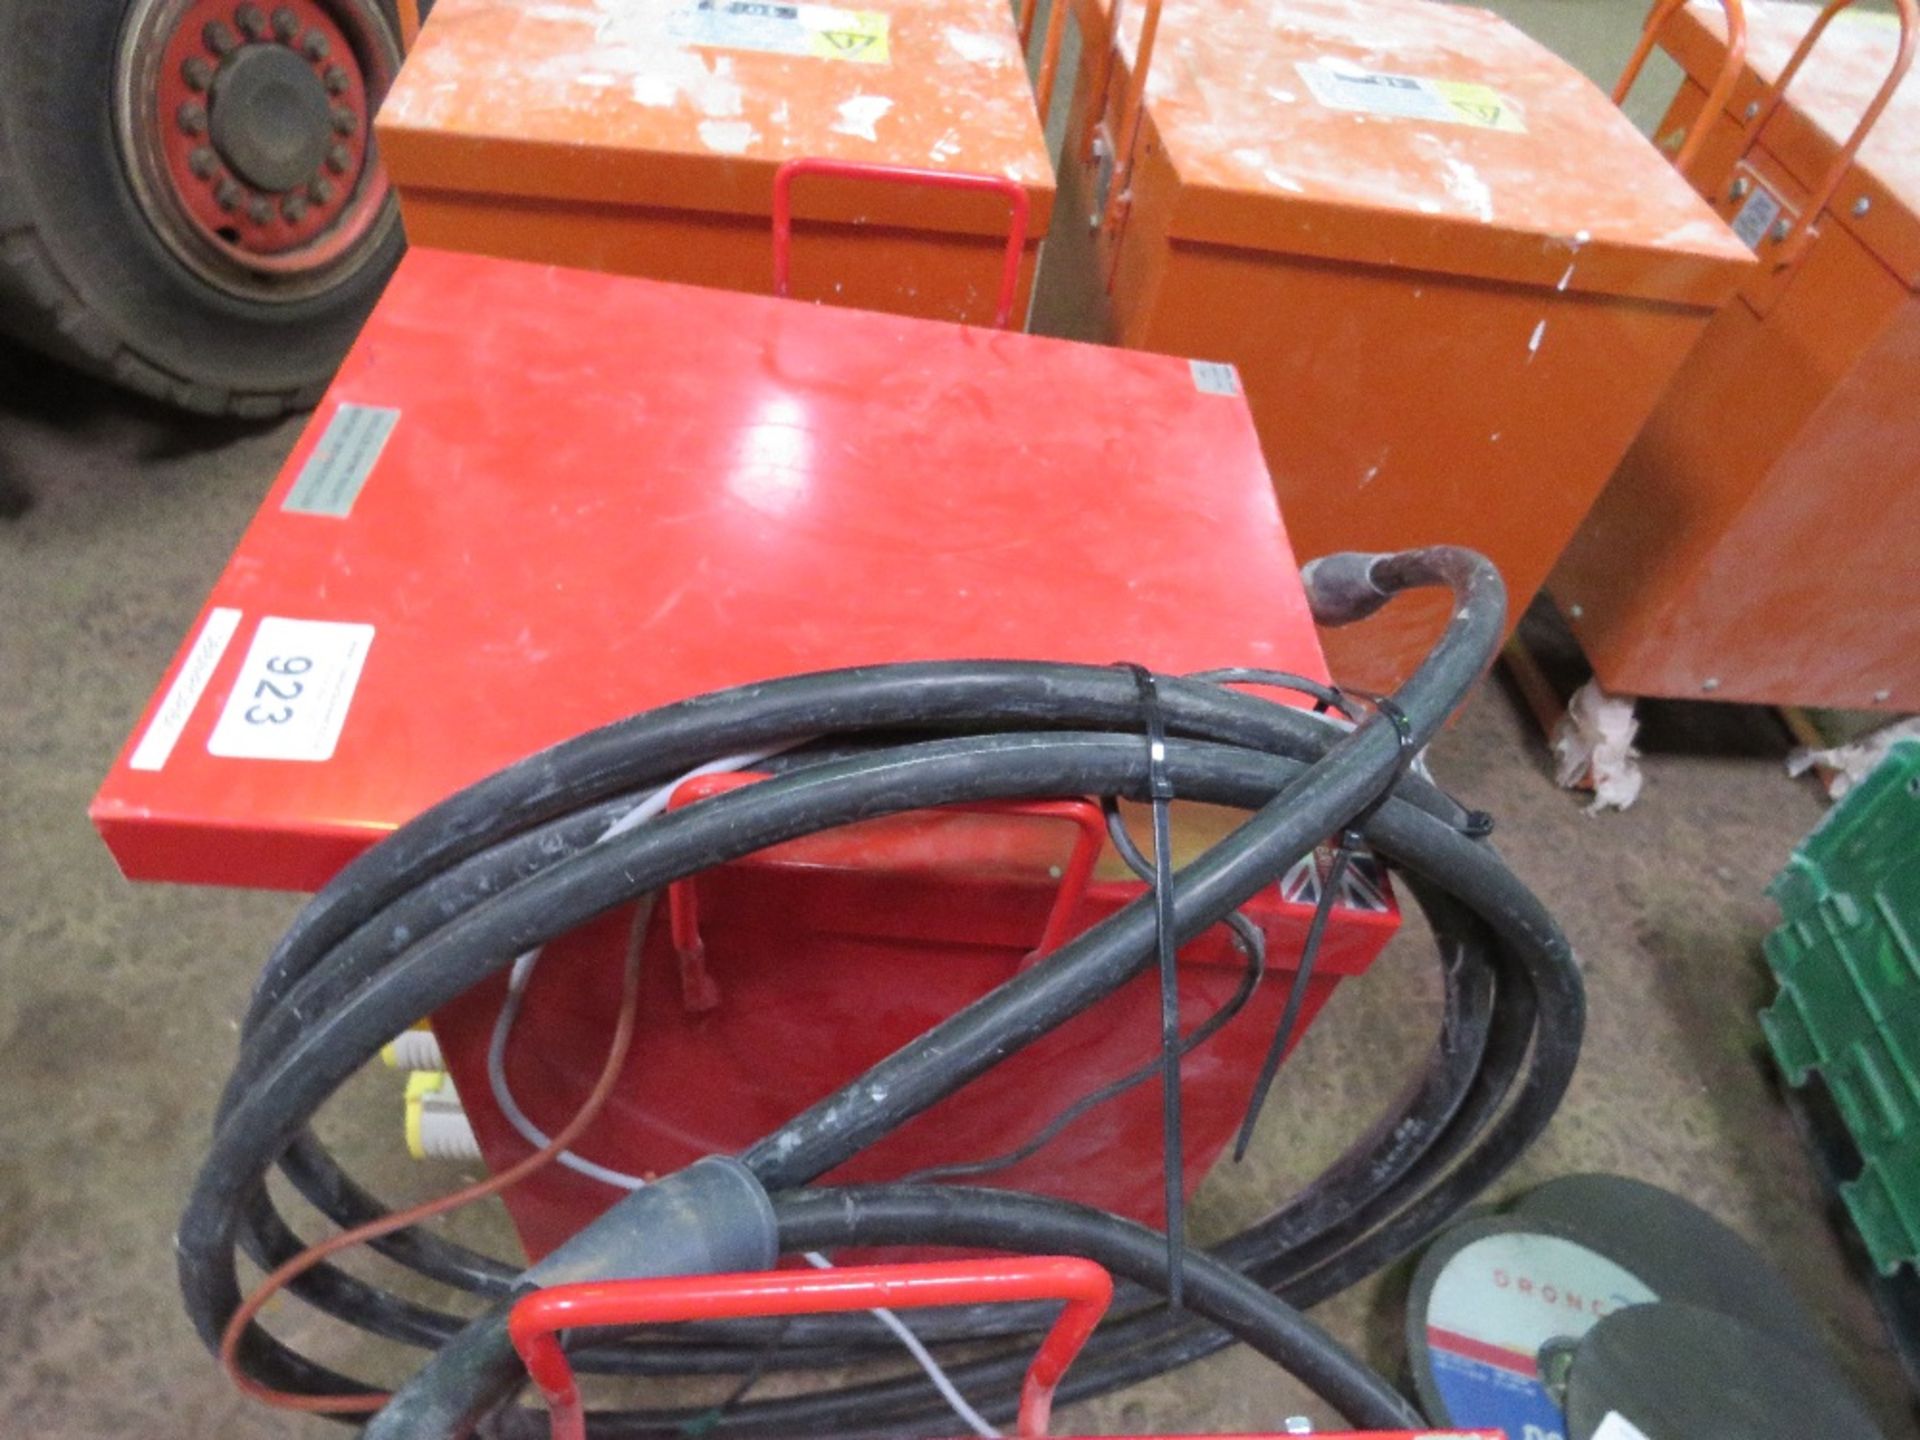 10KVA SITE TRANSFORMER, RED, 240VOLT INPUT, 110VOLT OUTPUT. SOURCED FROM COMPANY LIQUIDATION. THIS - Image 3 of 4